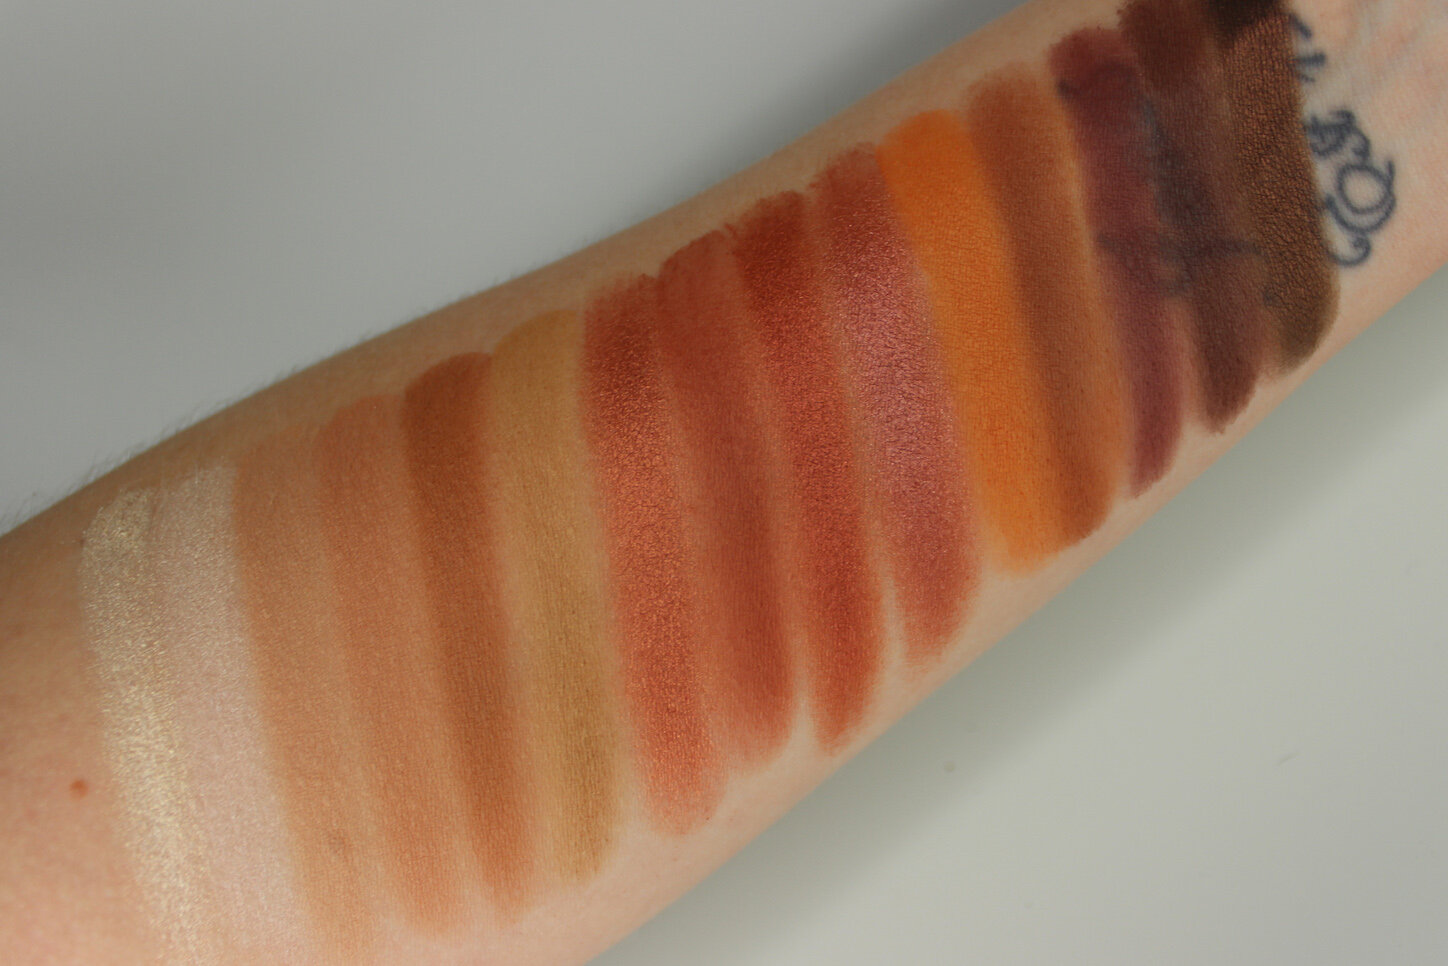 REVOLUTION RE-LOADED PALETTES SWATCHES